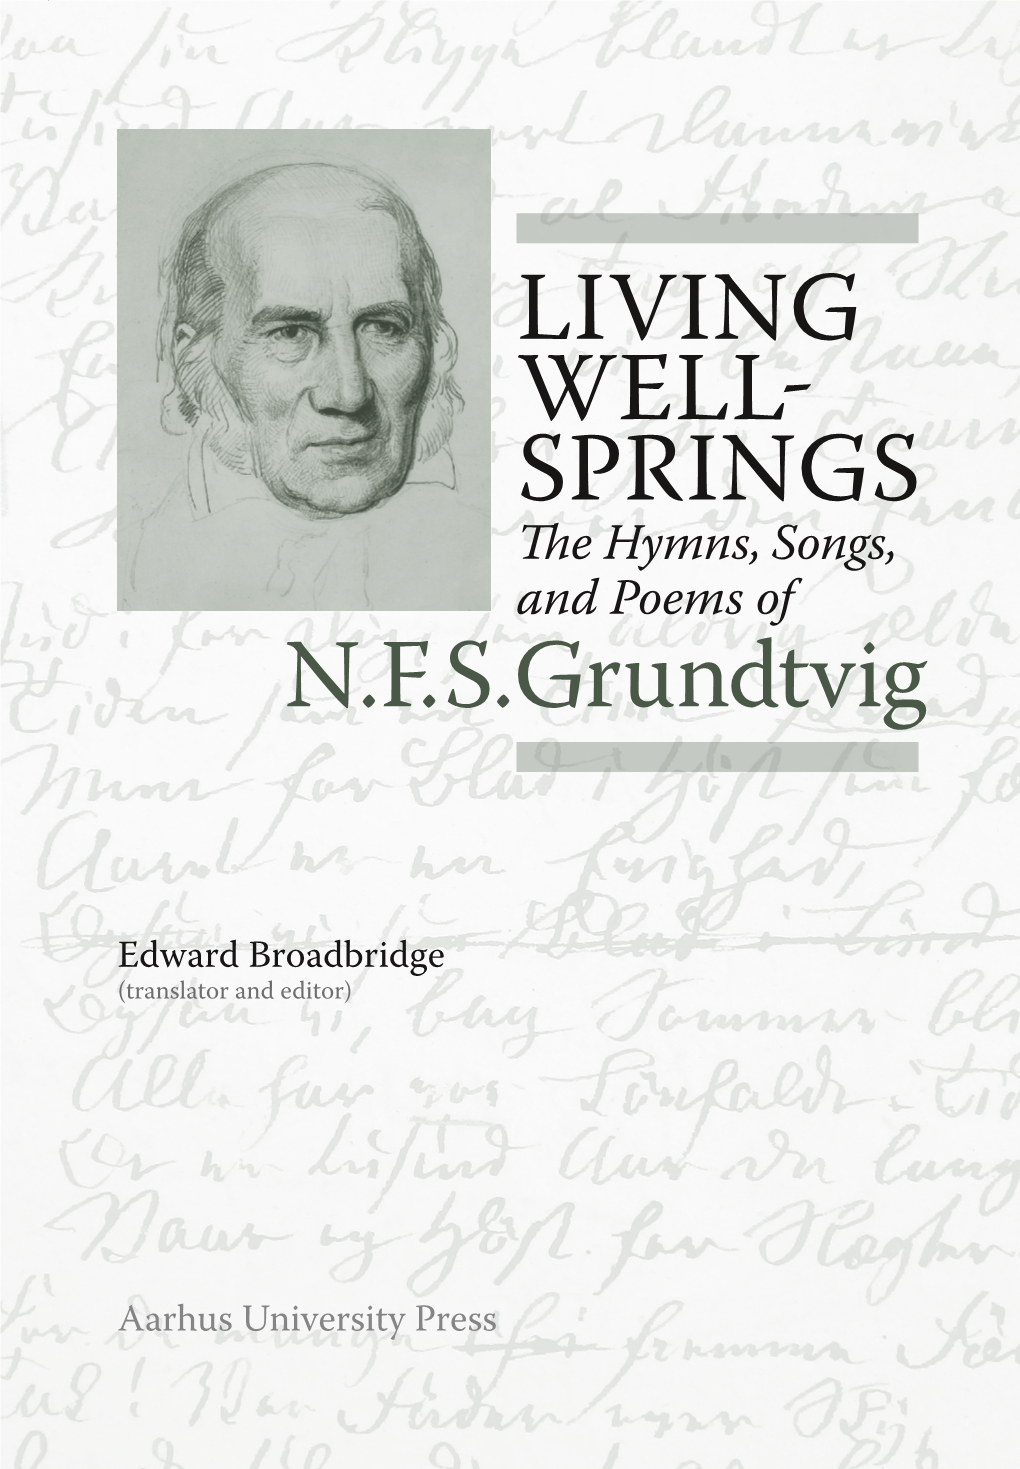 The Hymns, Songs, and Poems of NFS Grundtvig